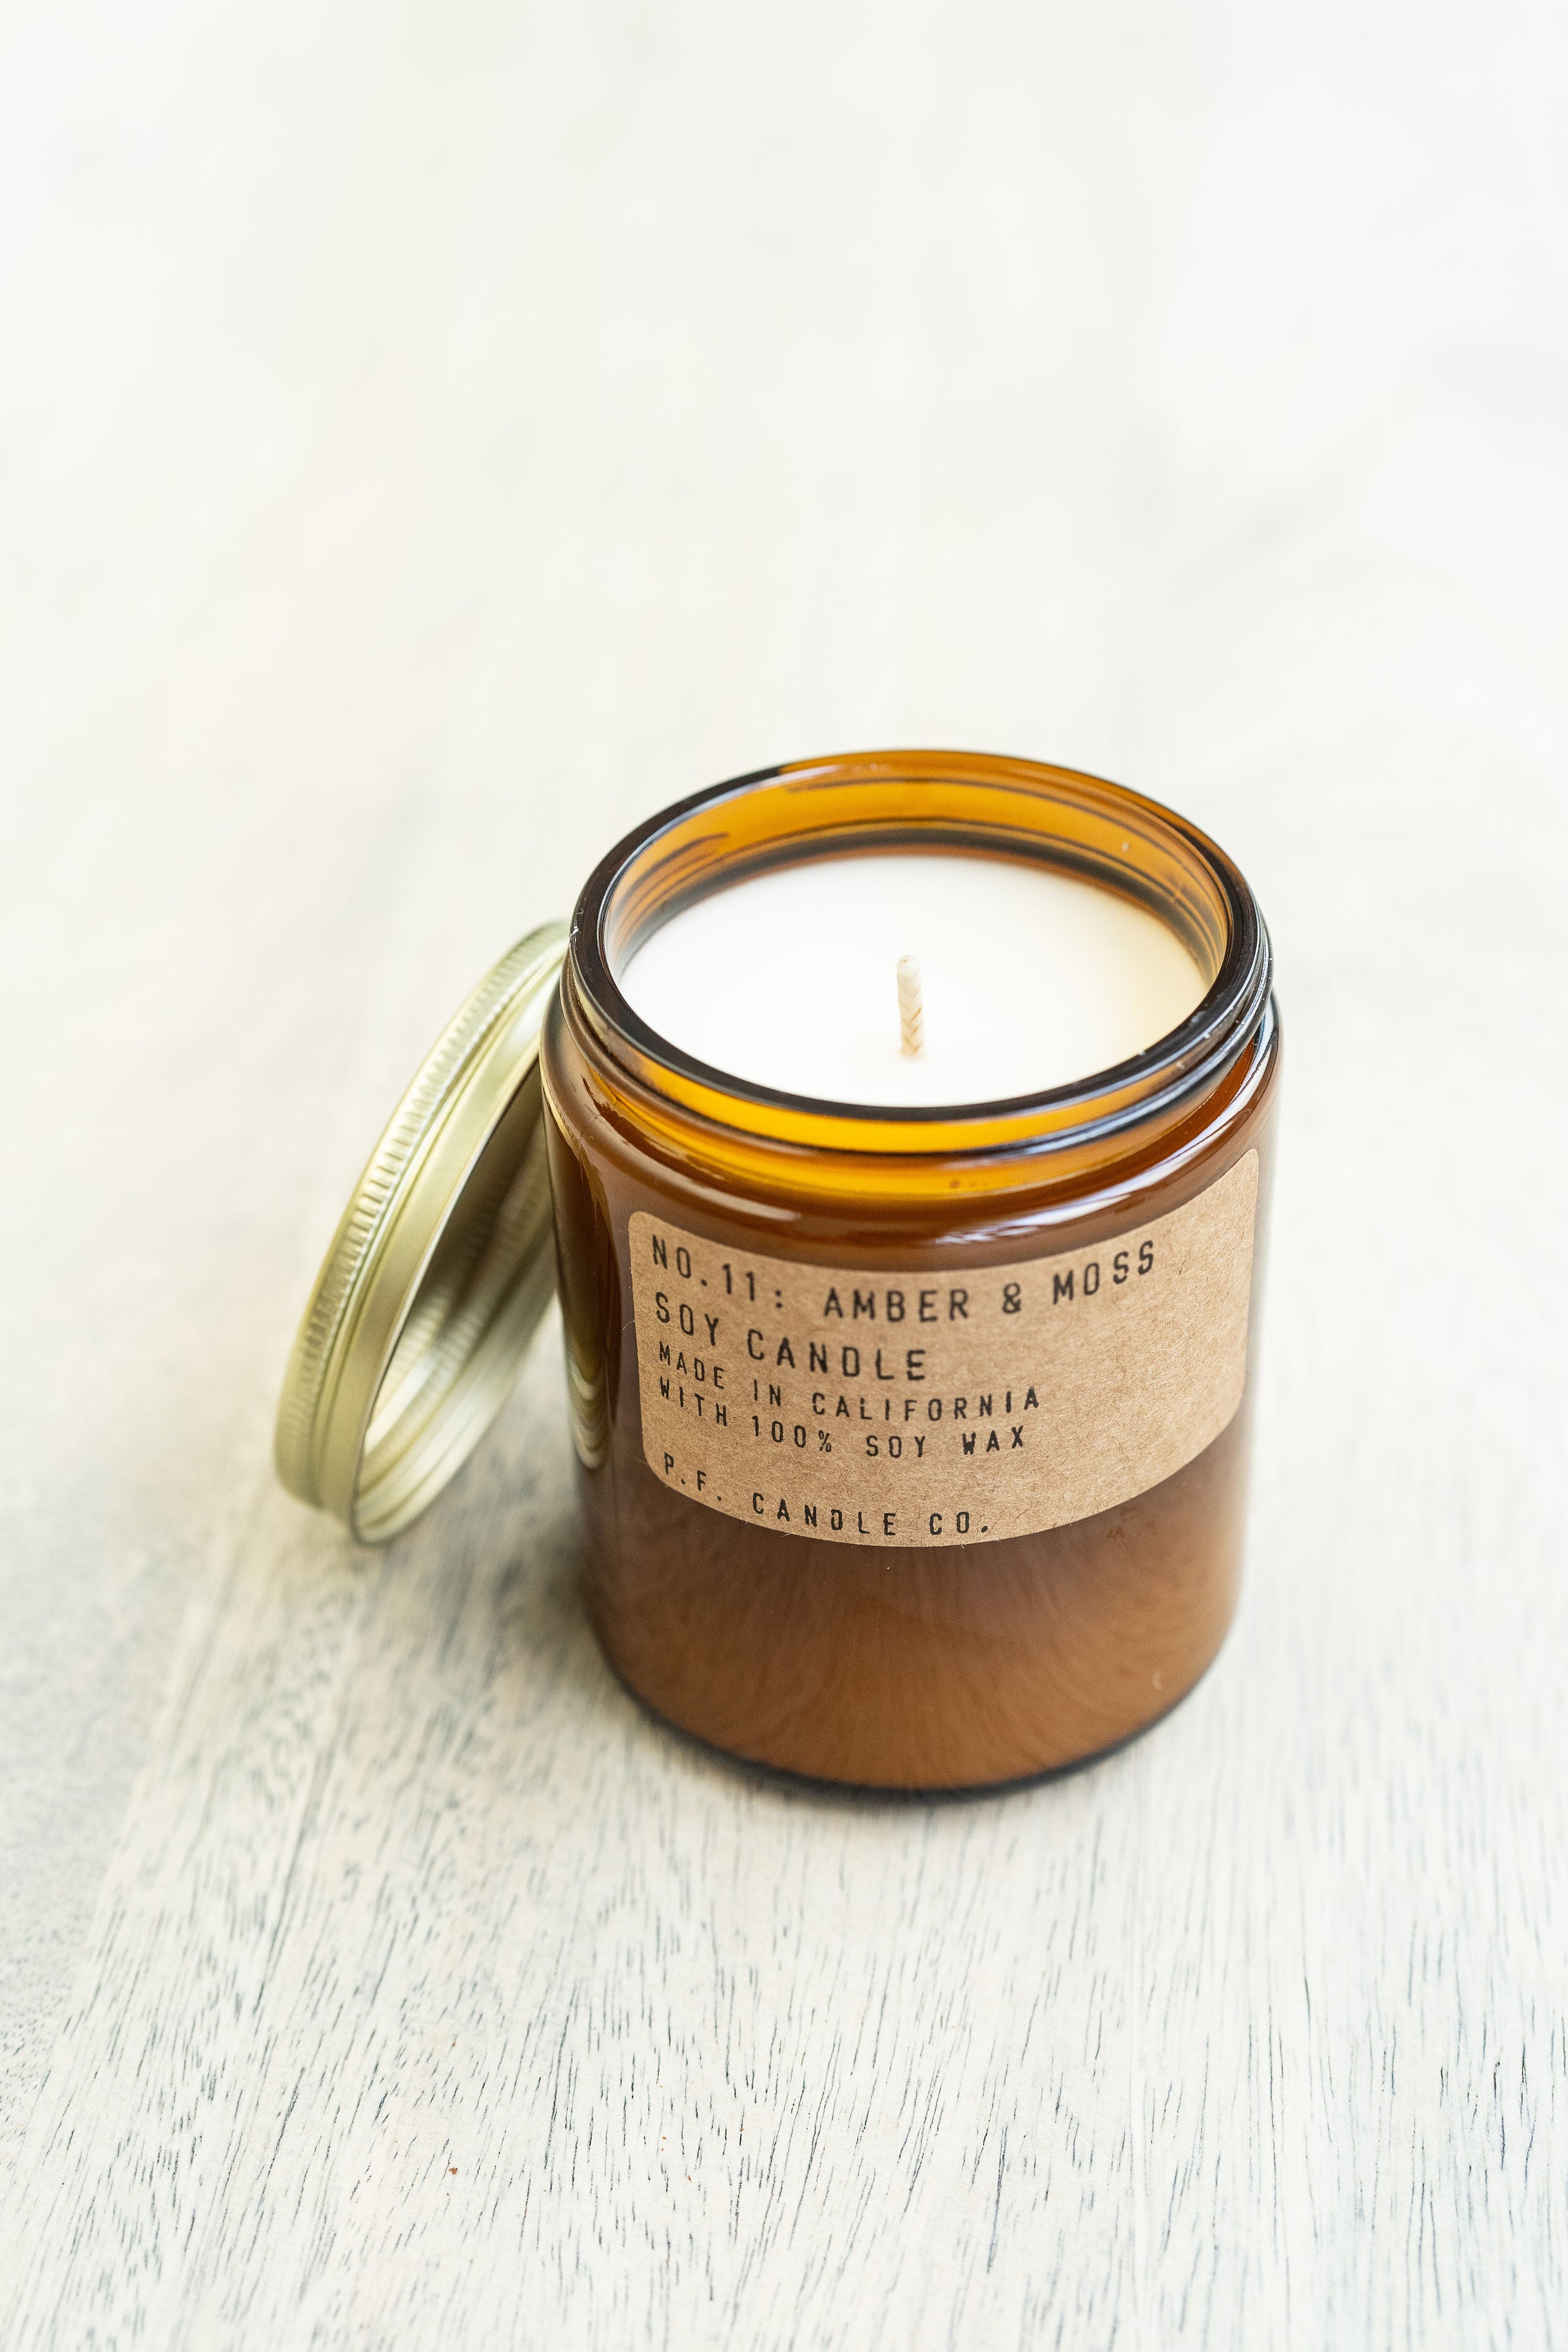 P.F Candle Co Amber & Moss Candle